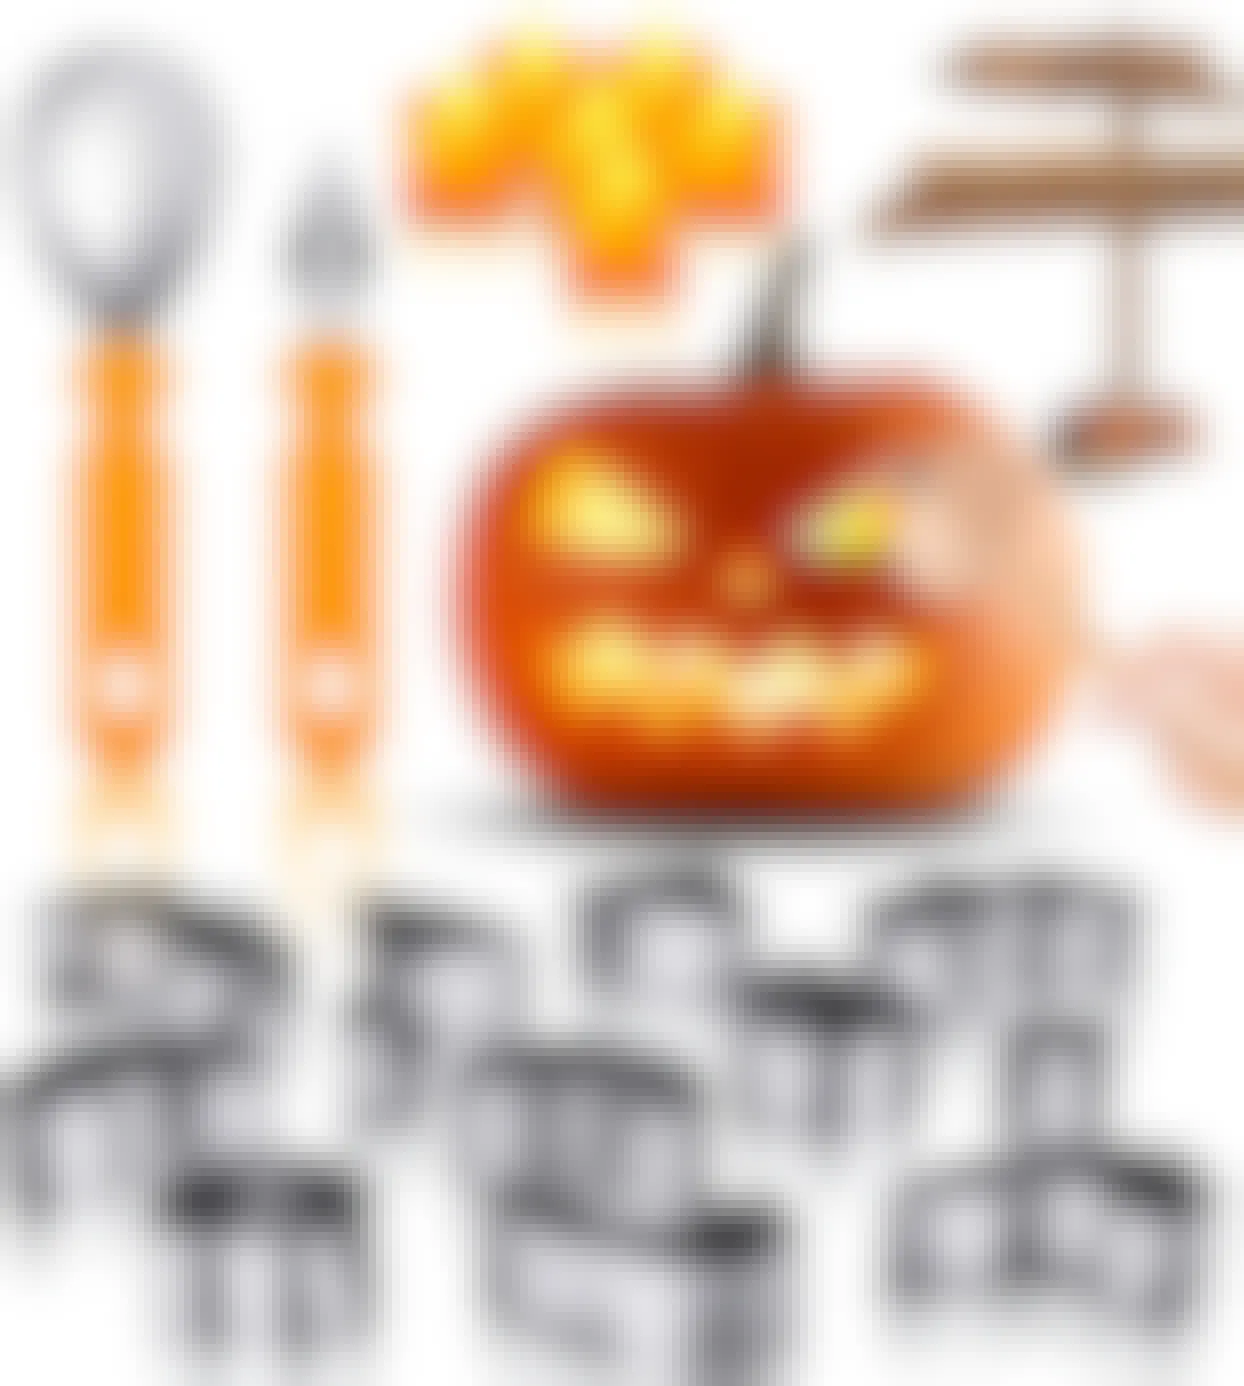 best pumpkin carving kit - A Pcavin Pumpkin Carving Kit on a white background.